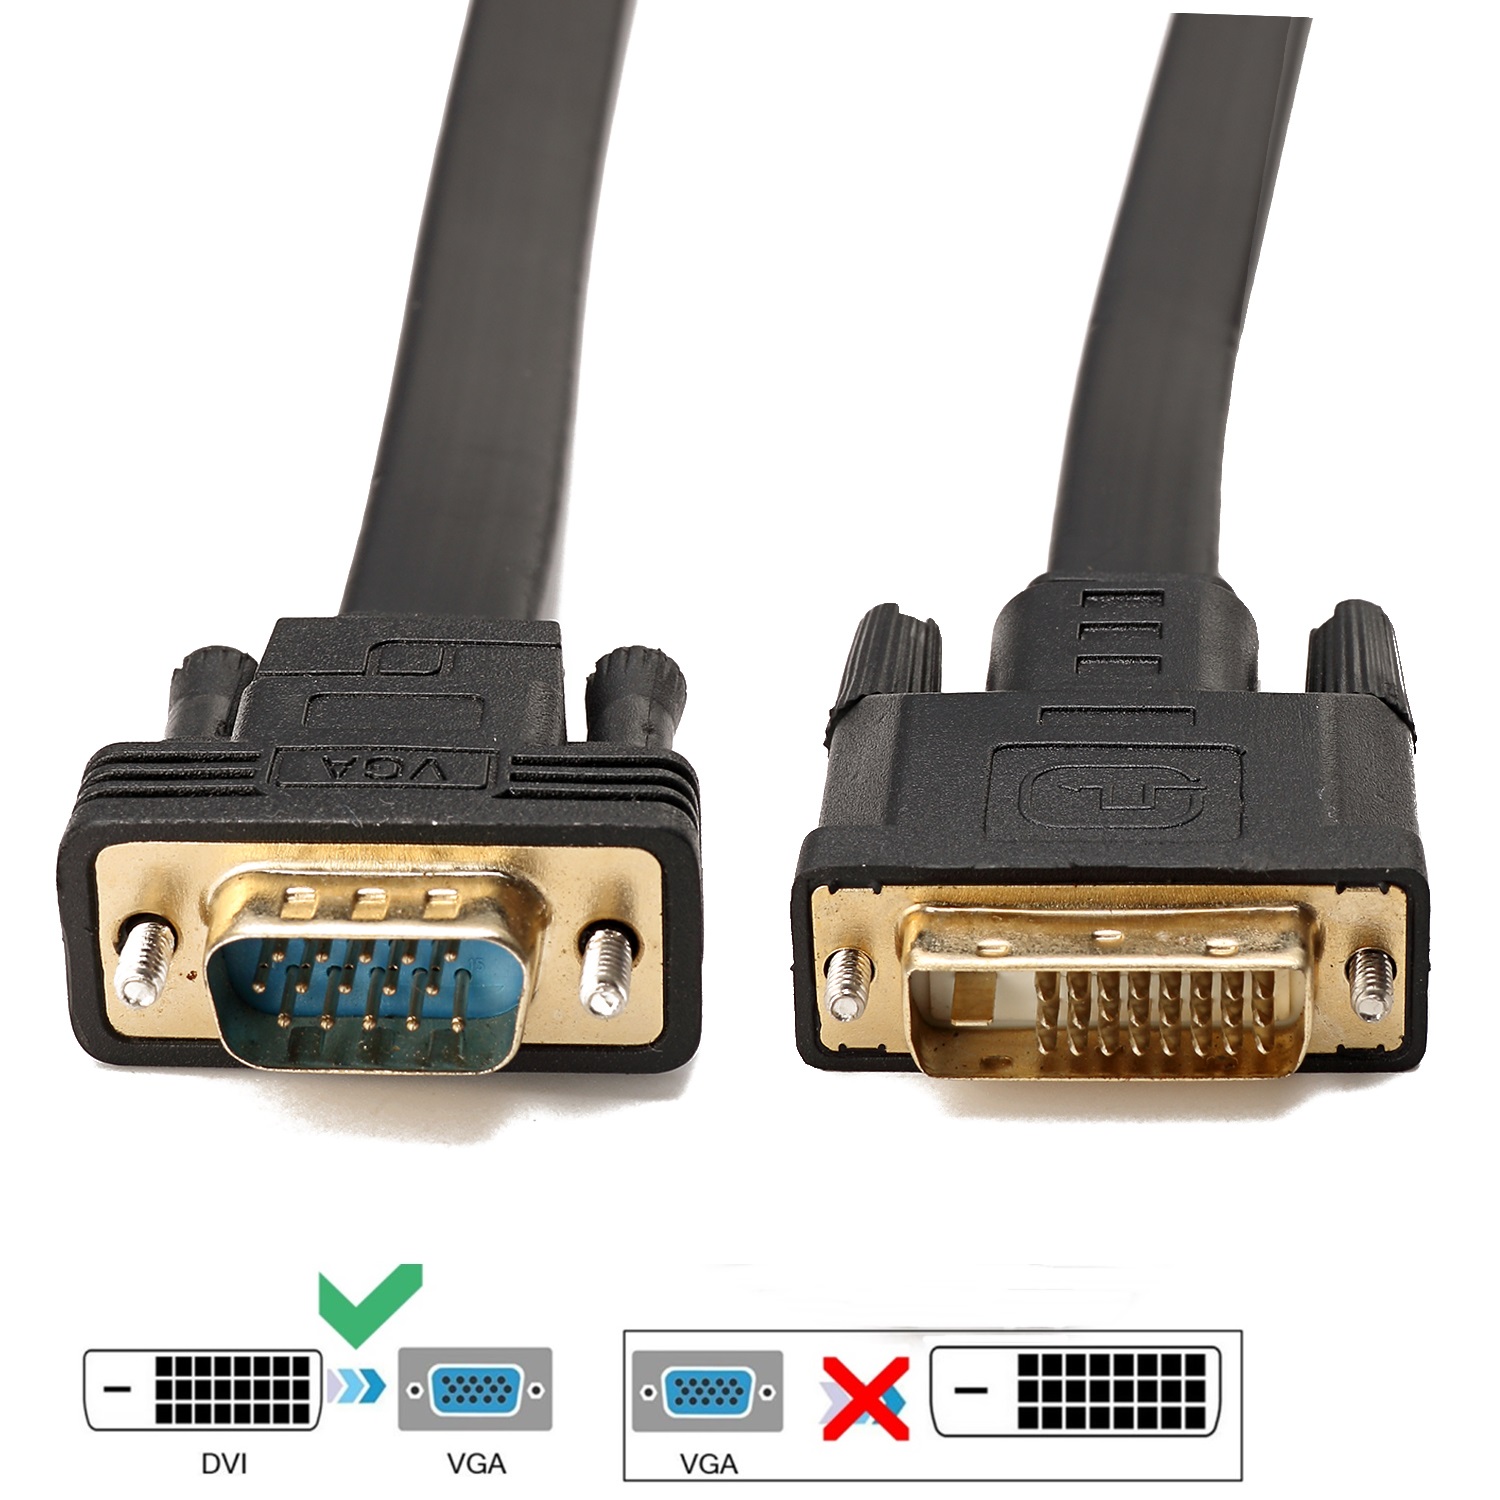 CABLEDECONN Active DVI to VGA, 6FT DVI 24+1 DVI-D M to VGA Male with Chip Active Adapter Converter Cable for PC DVD Monitor HDTV  E0308